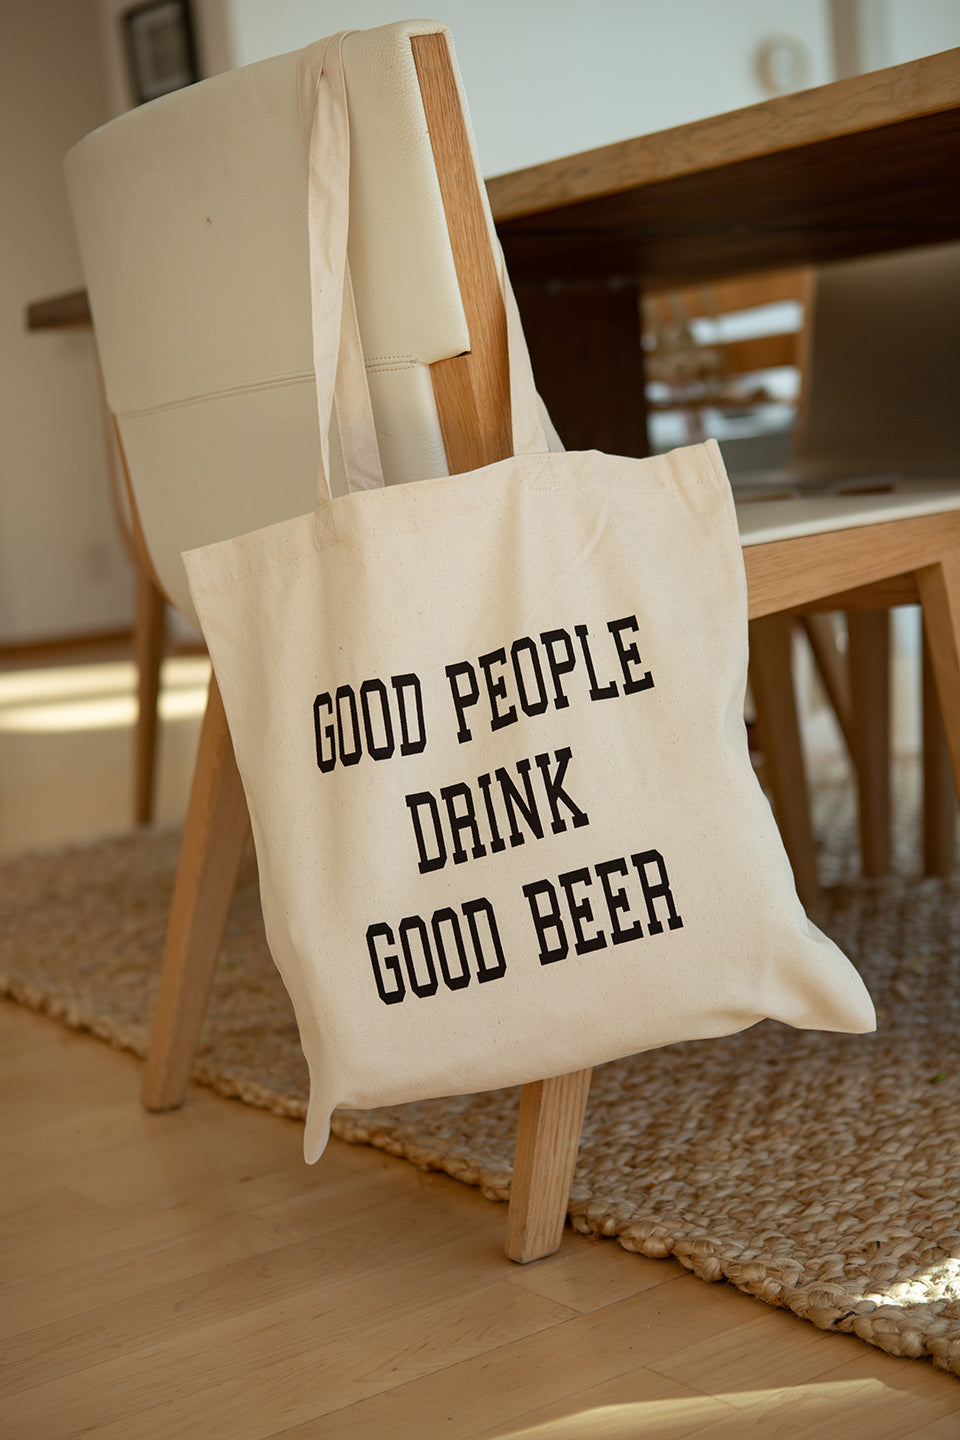 Good People Drink Good Beer Tote Bag ($15 for a single canvas tote)